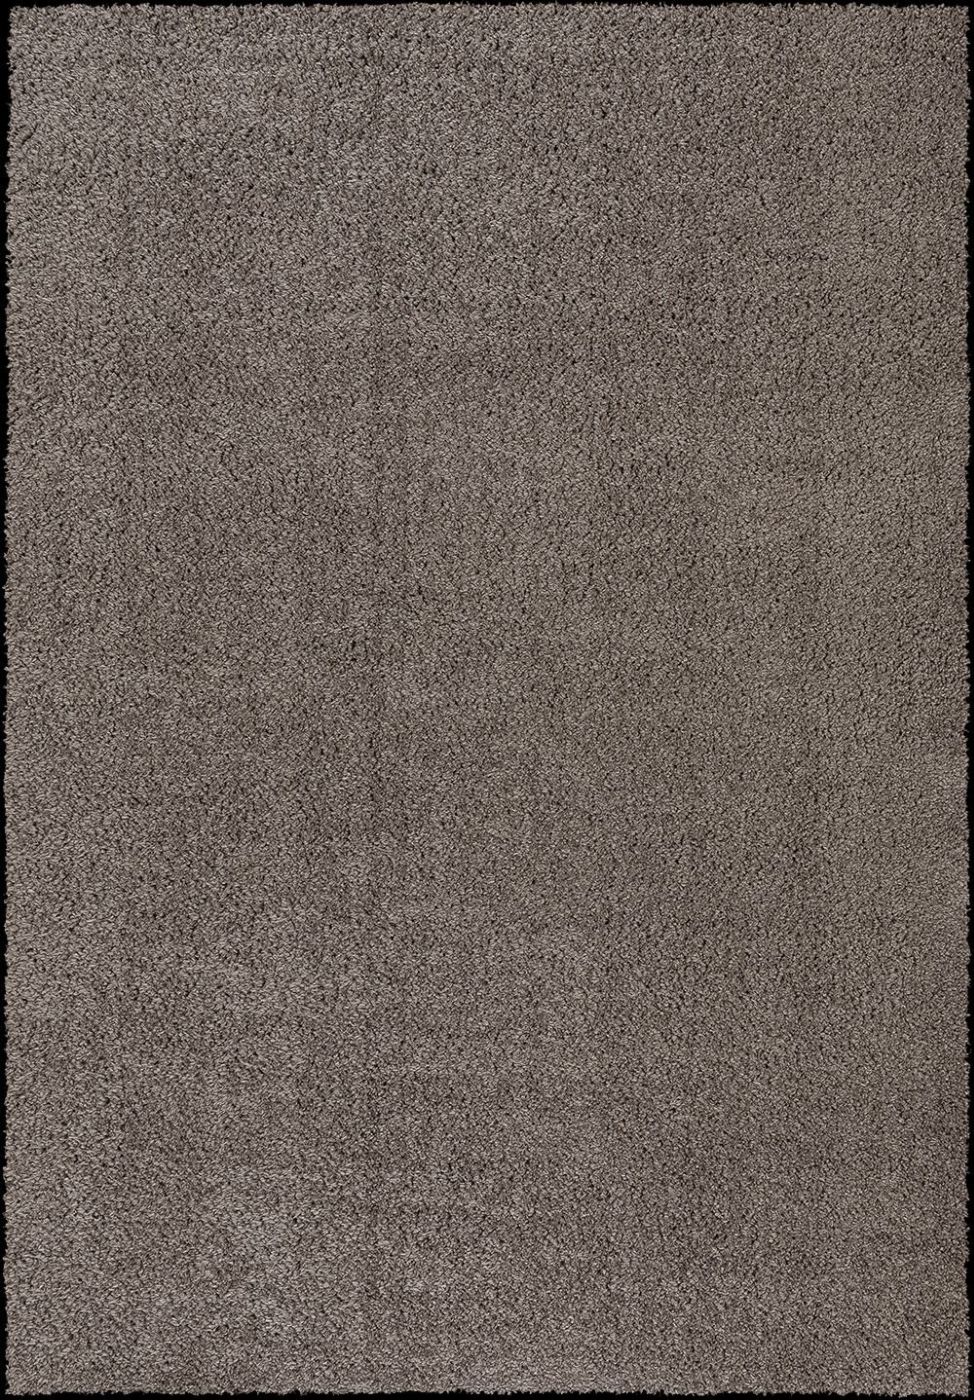 Teppich Queens 120 x 170 cm in taupe